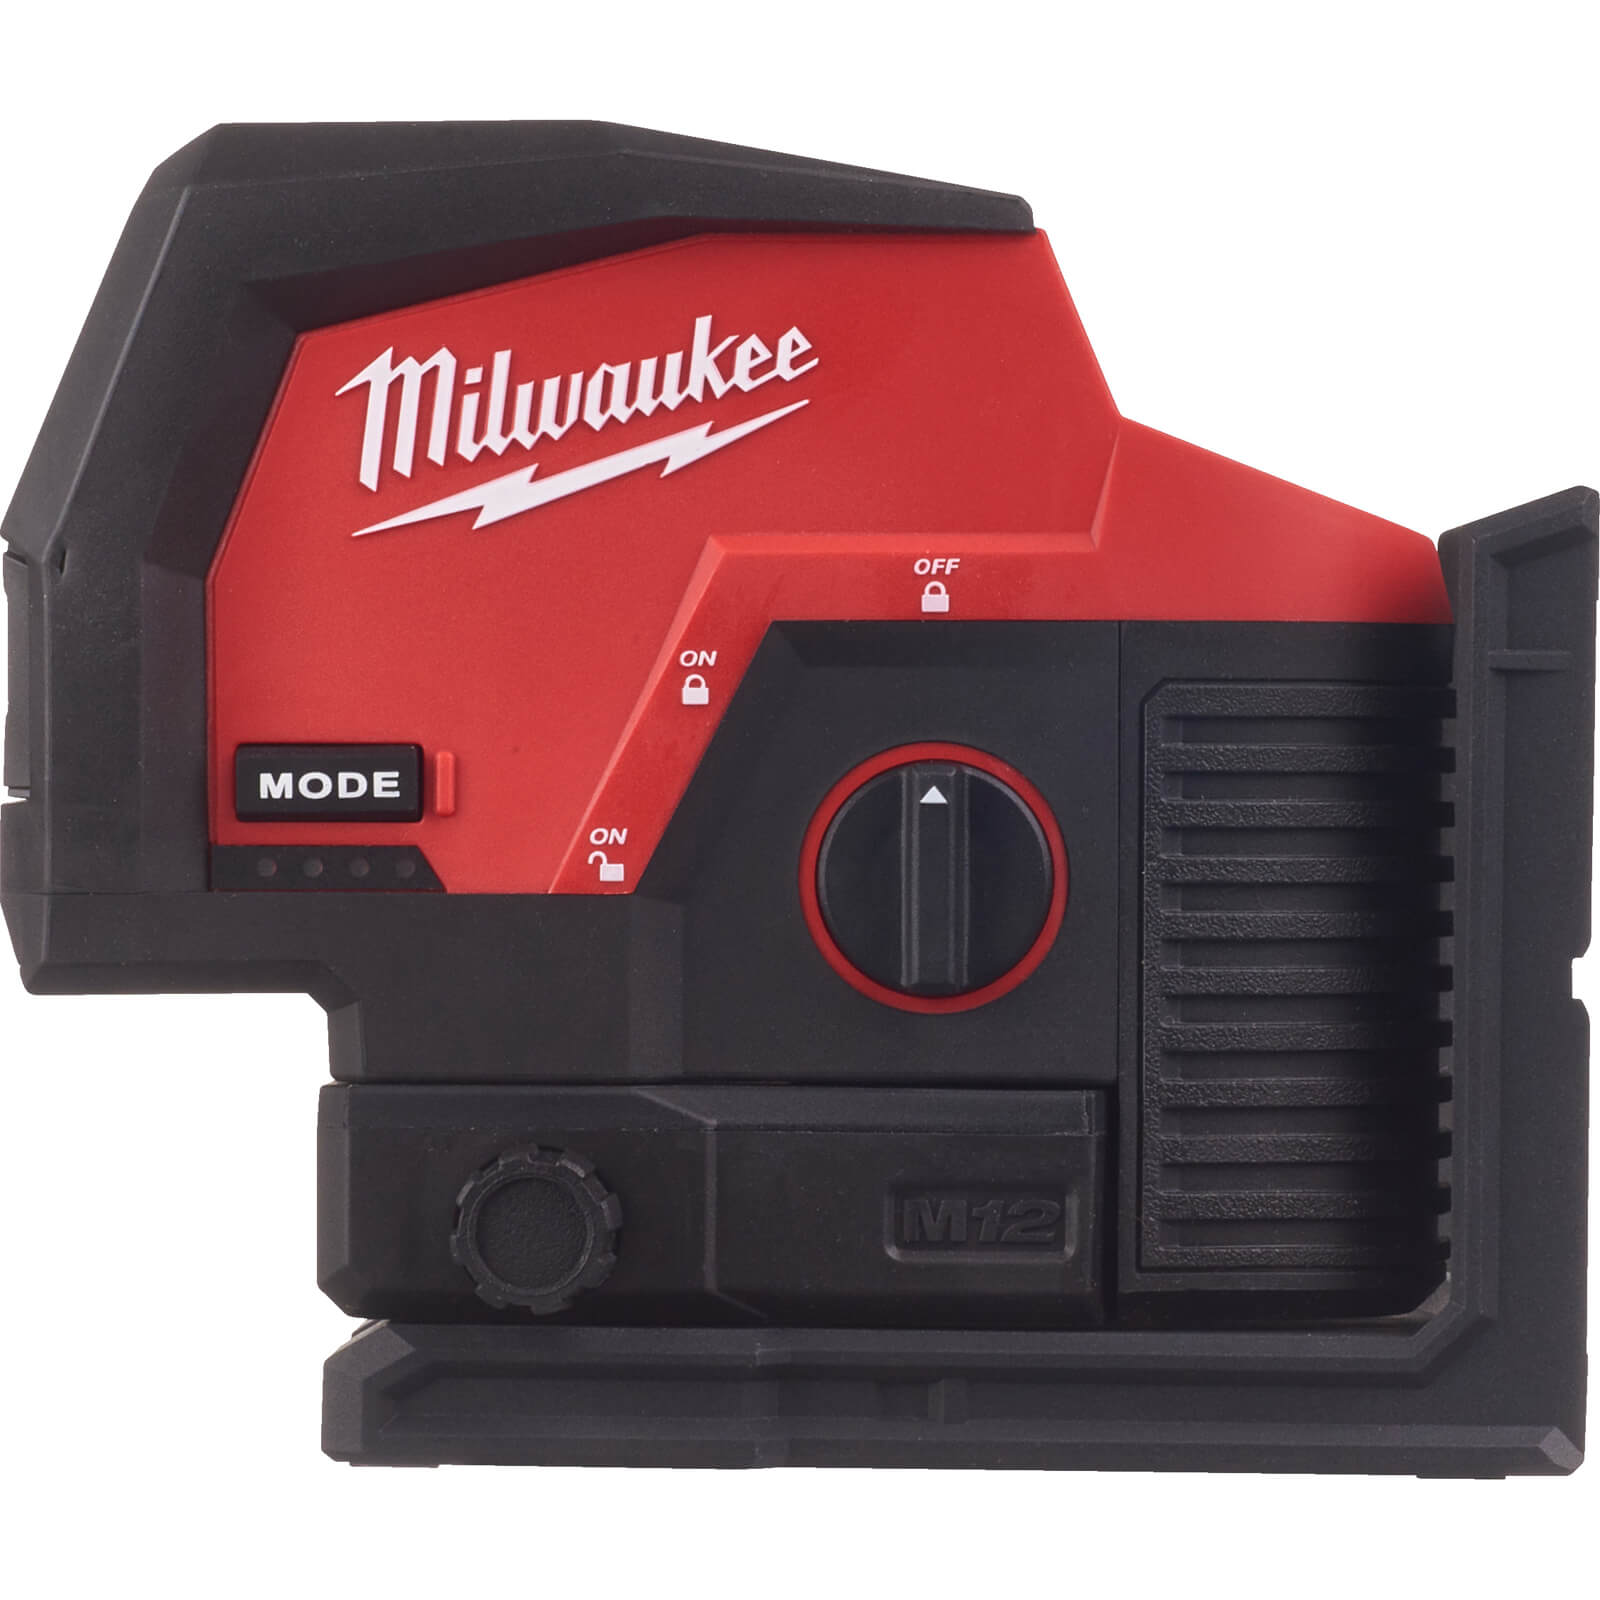 Image of Milwaukee M12 CLLP 12v Cordless Green Cross Line Laser Level No Batteries No Charger Case